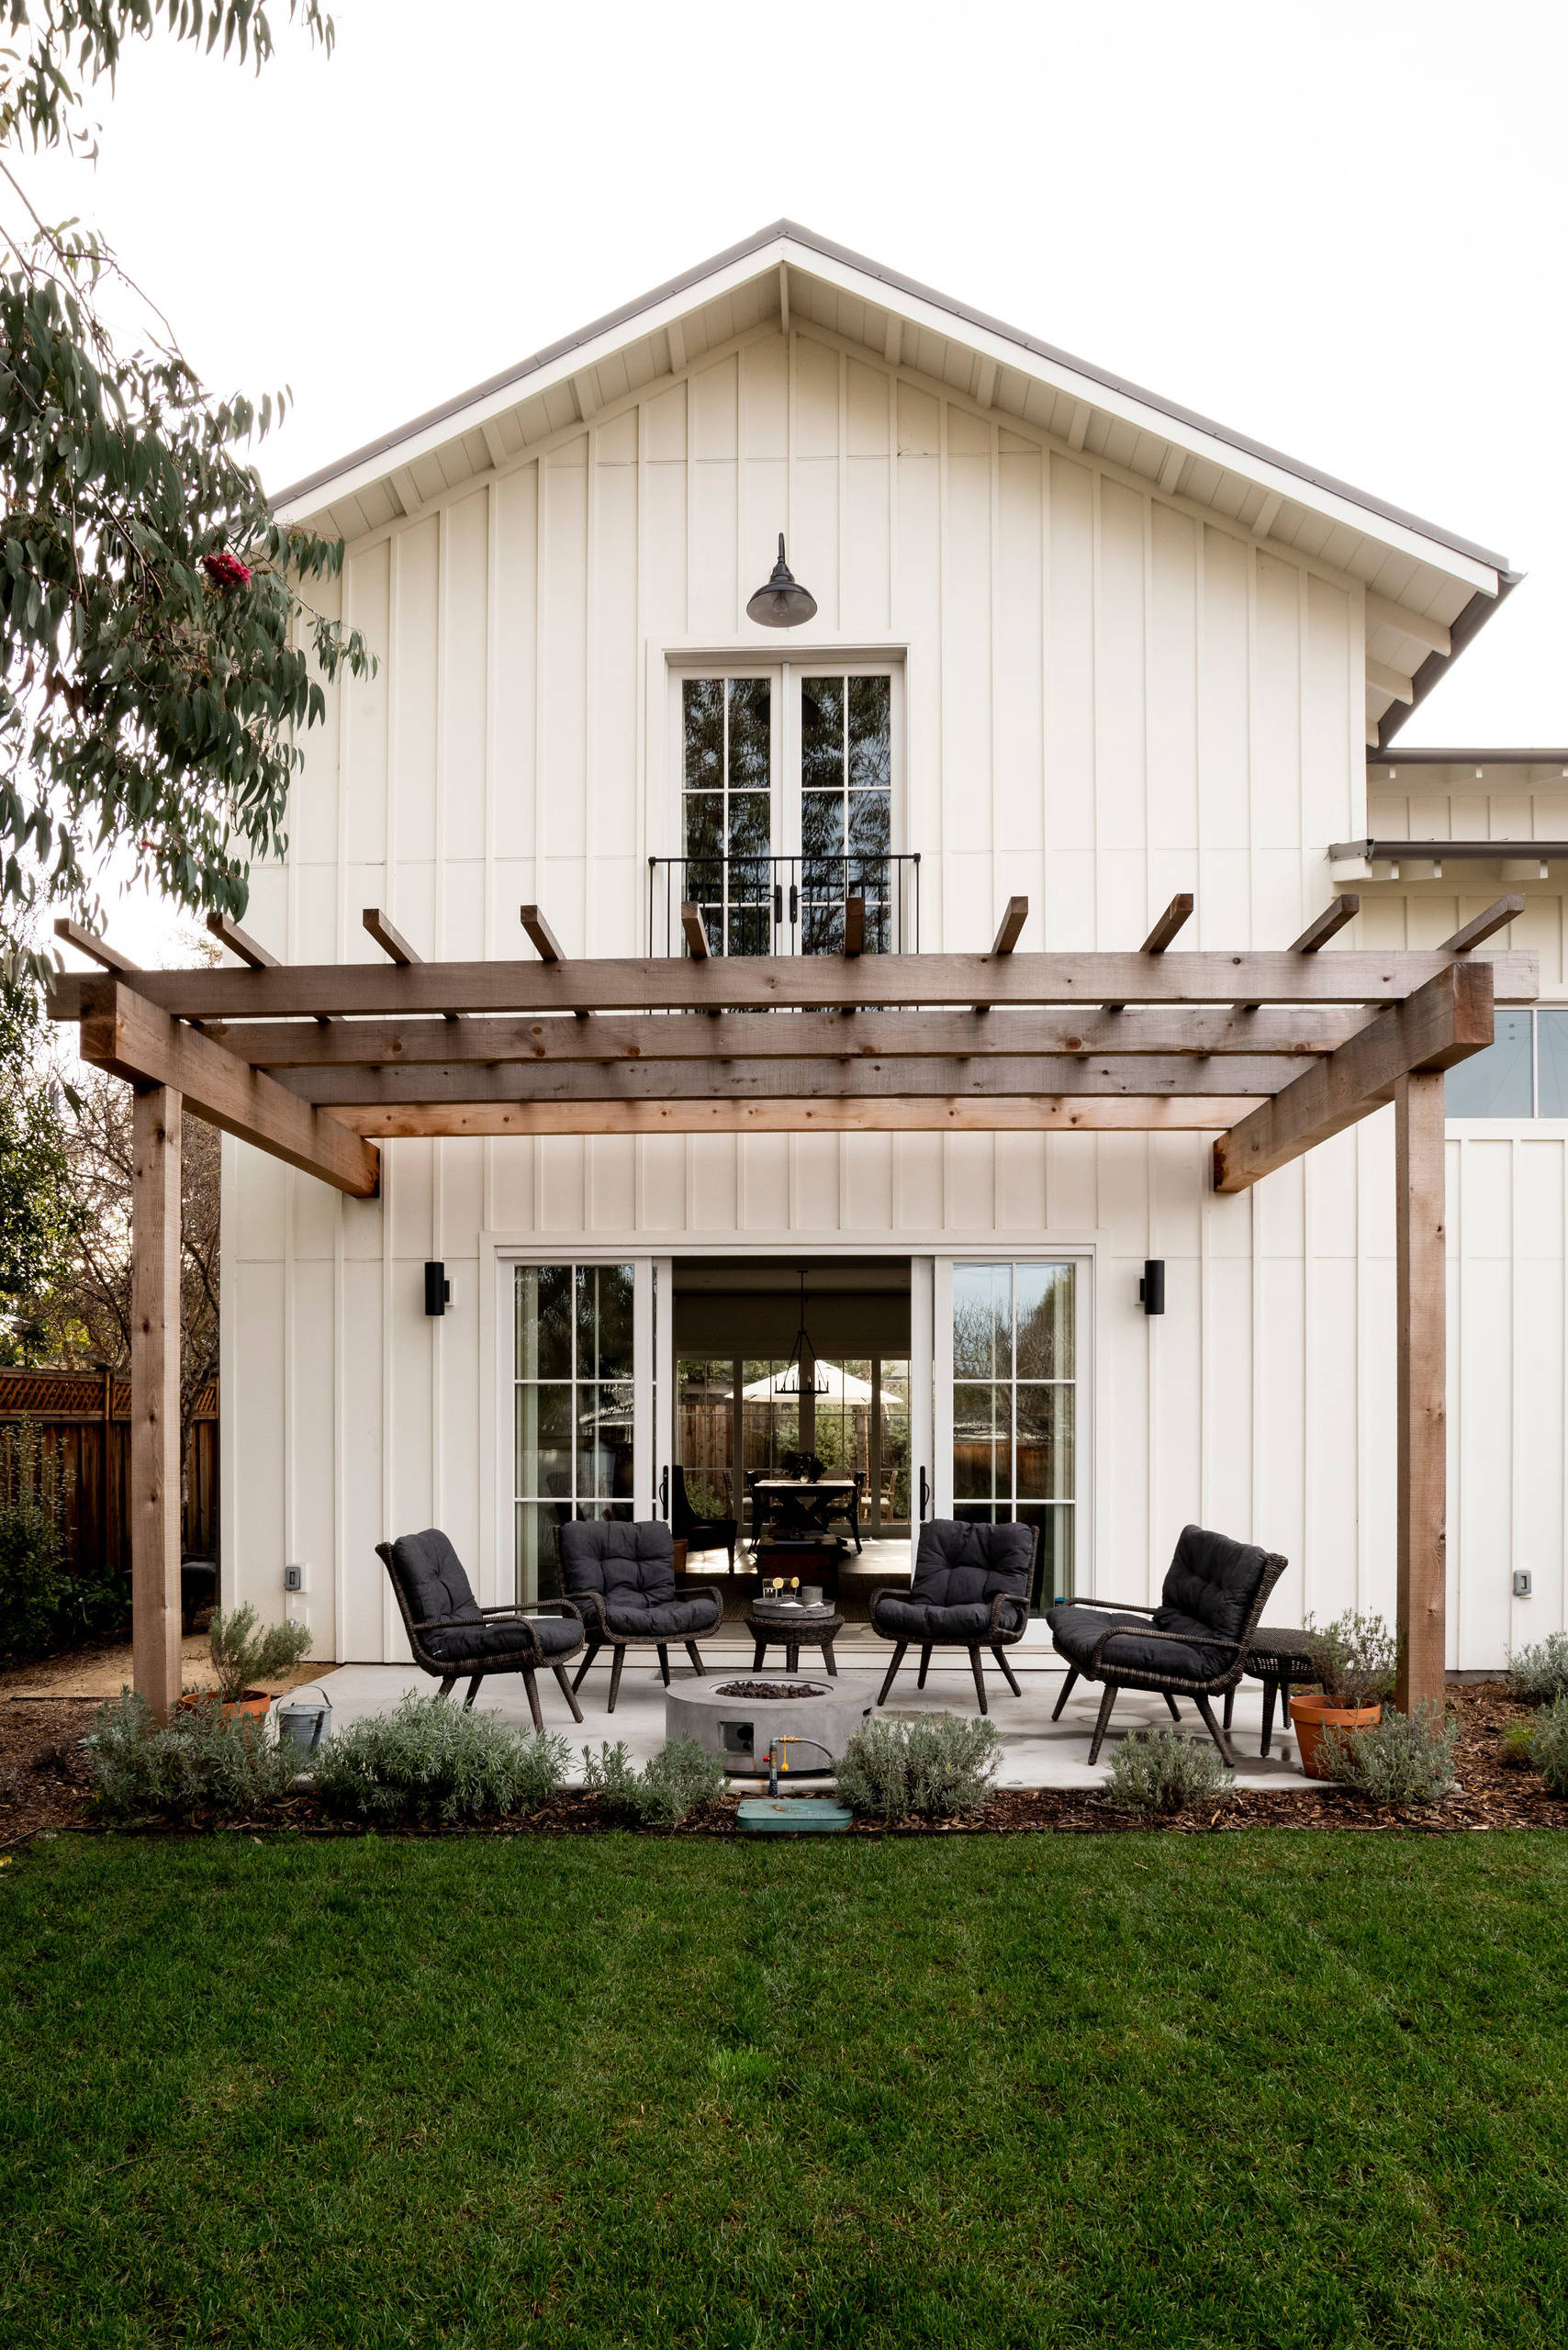 75 Mid-Sized Patio Ideas You'll Love - June, 2022 | Houzz